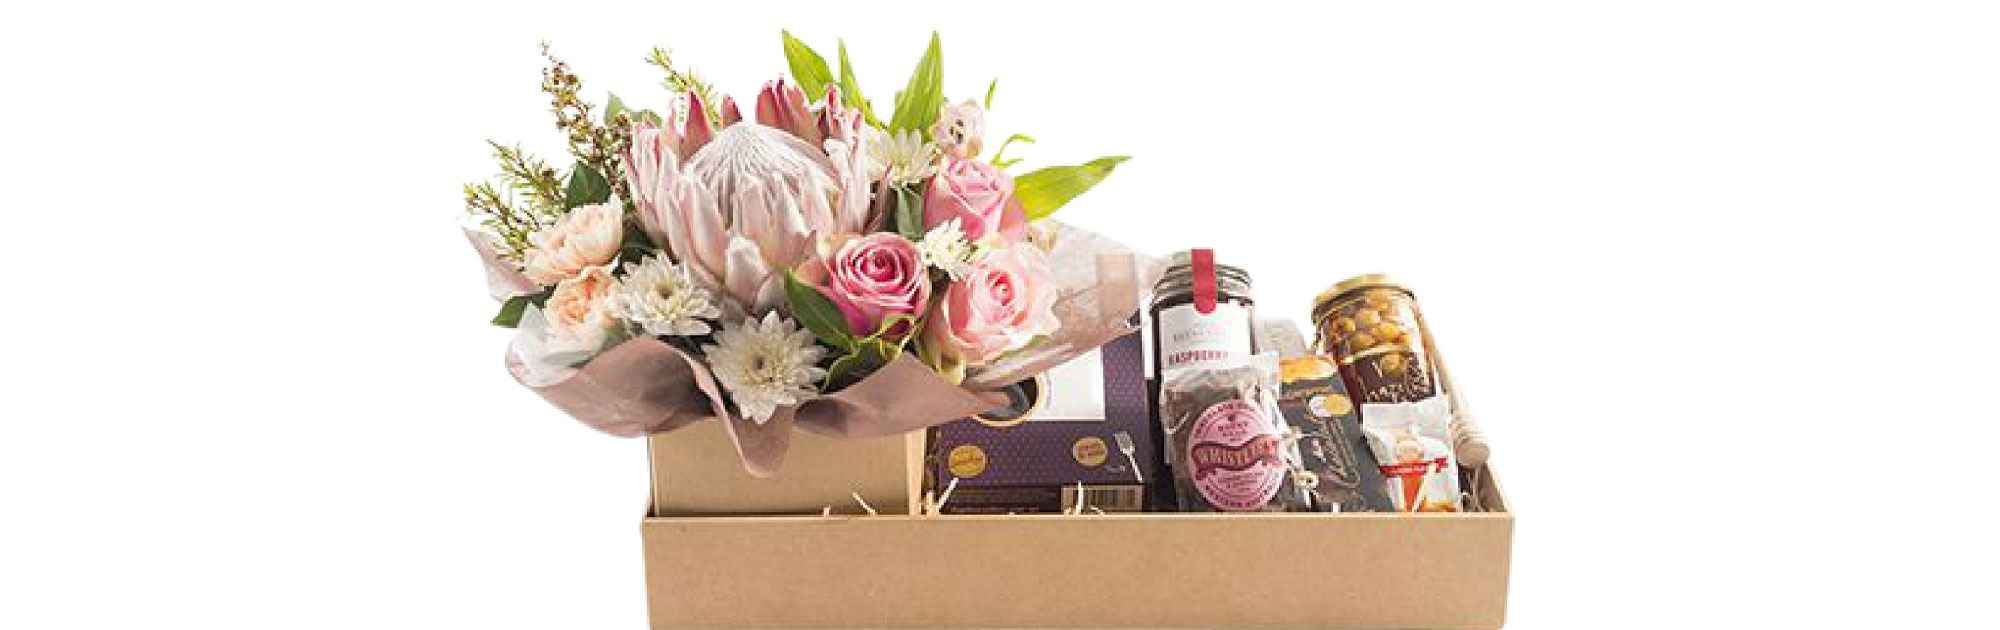 Flowers & Gift Items